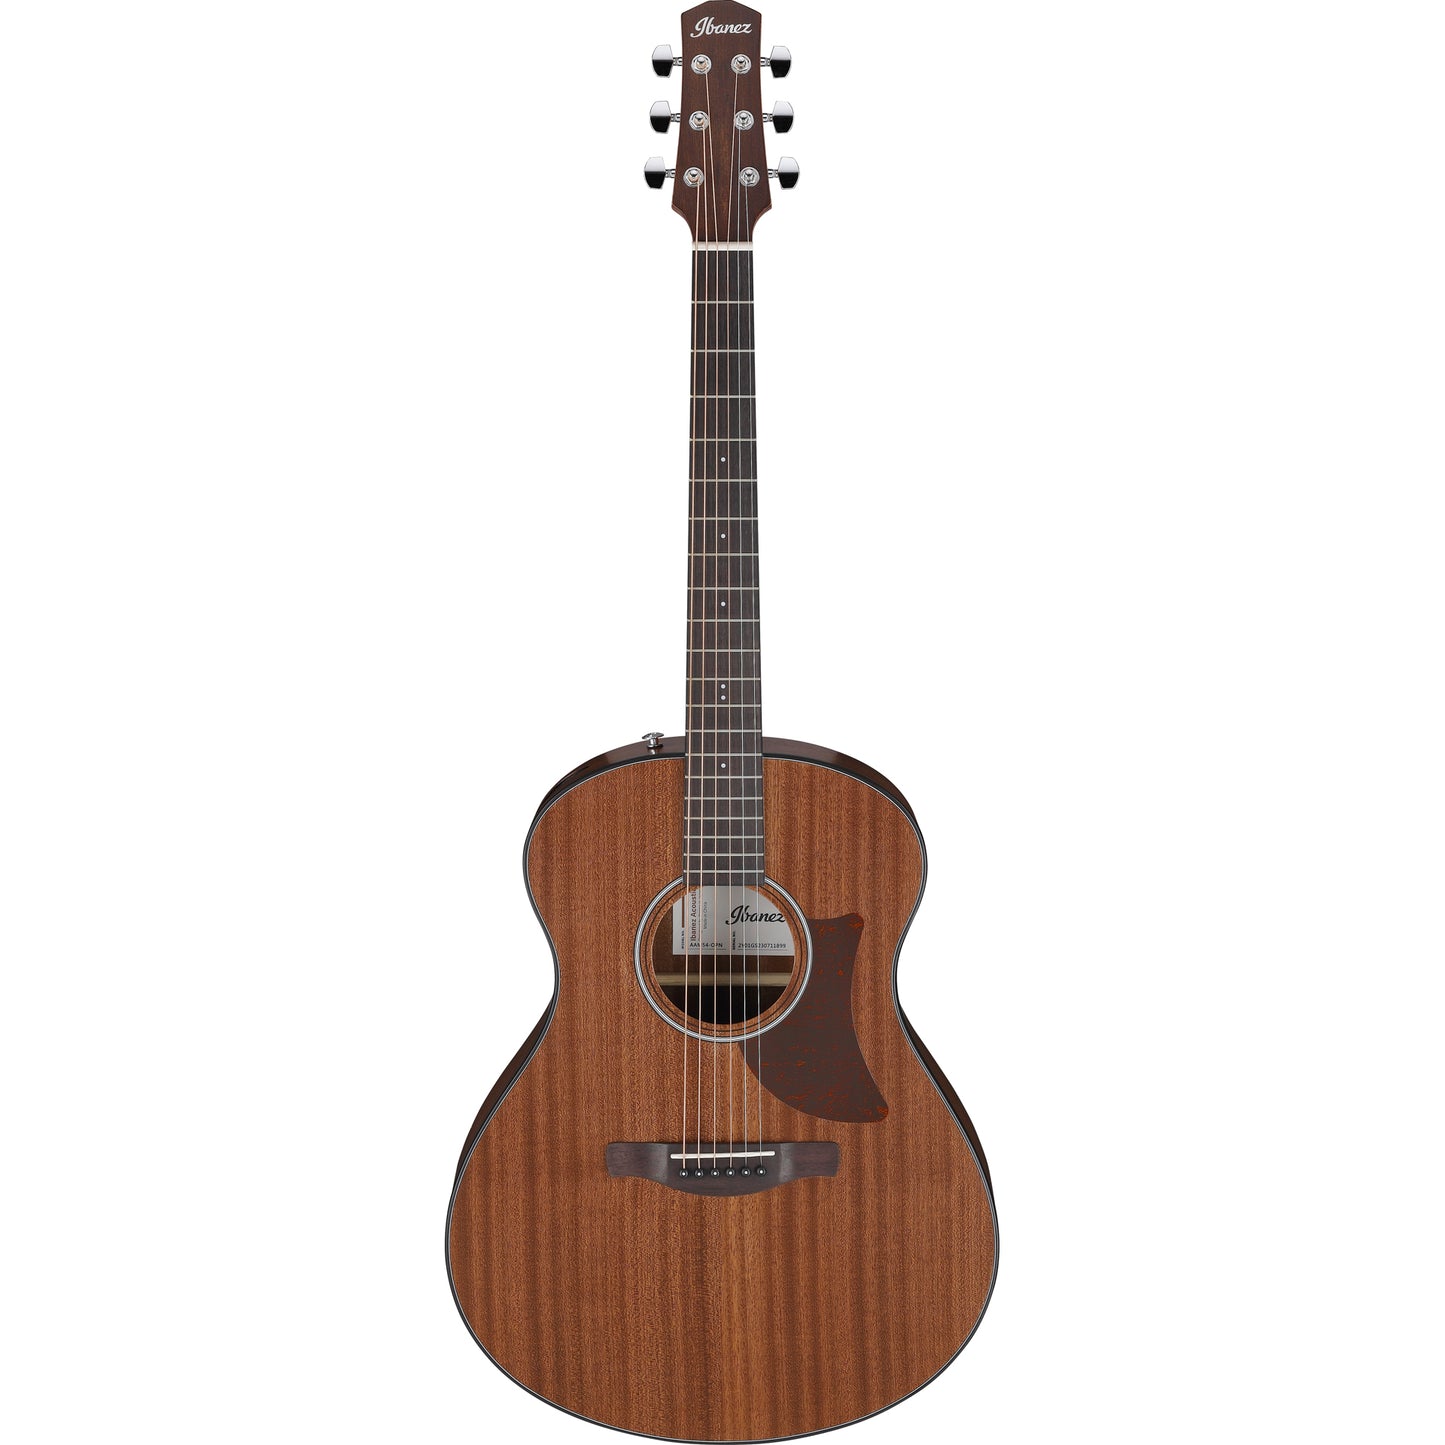 Ibanez AAM54 6 String Acoustic Guitar - Open Pore Natural